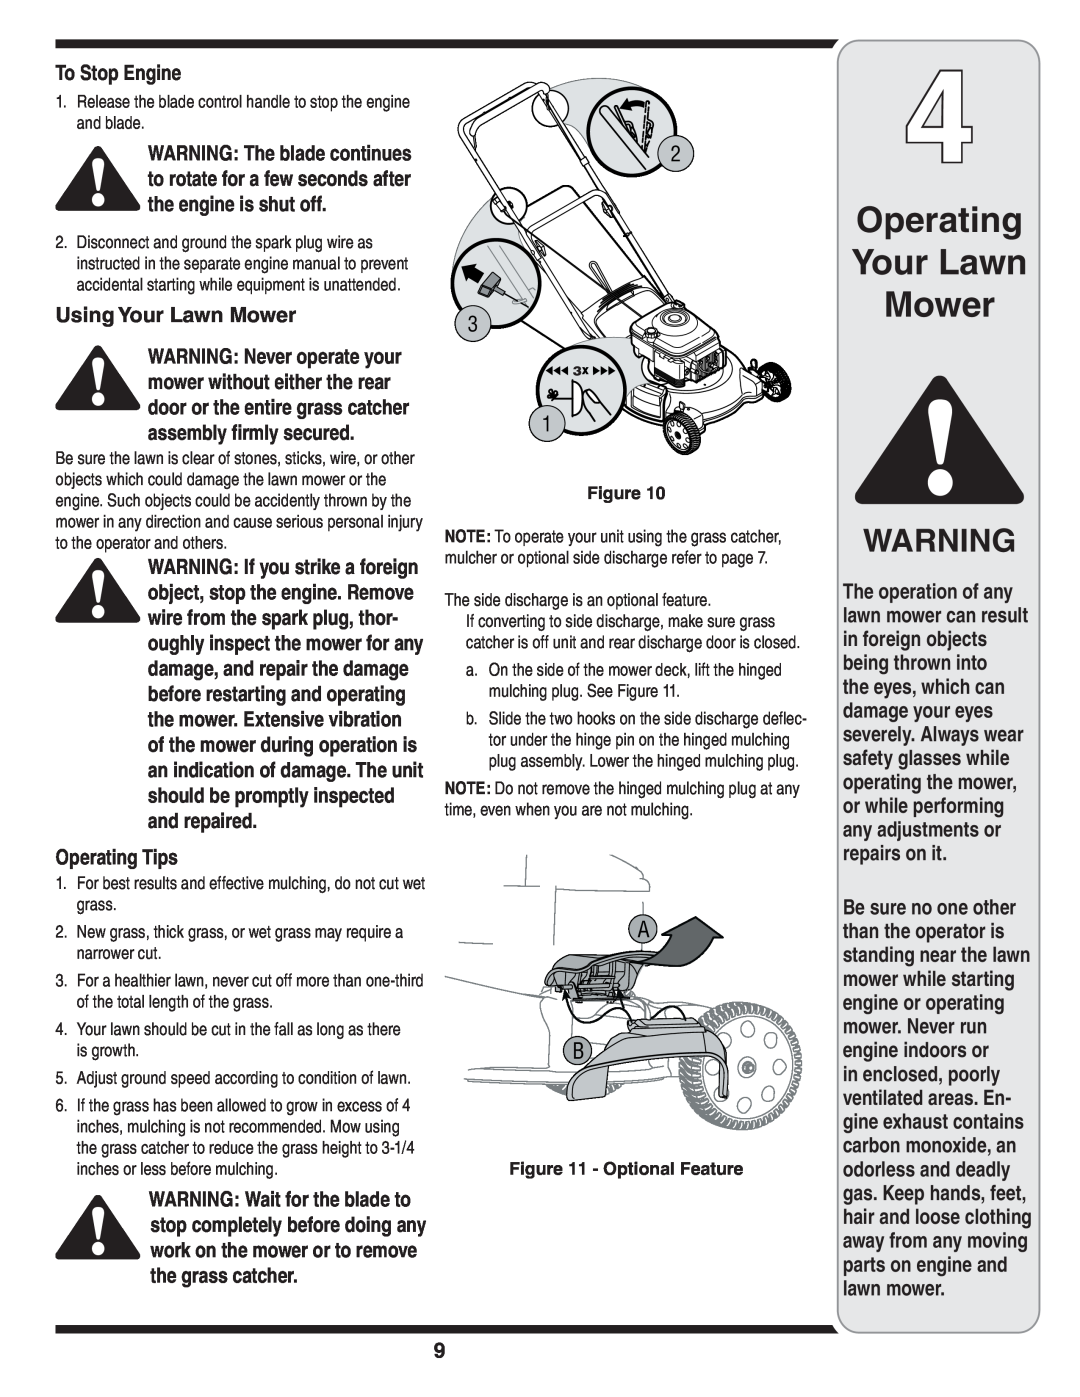 MTD 60-1622-0 warranty Operating Your Lawn Mower, To Stop Engine, Using Your Lawn Mower, Operating Tips 